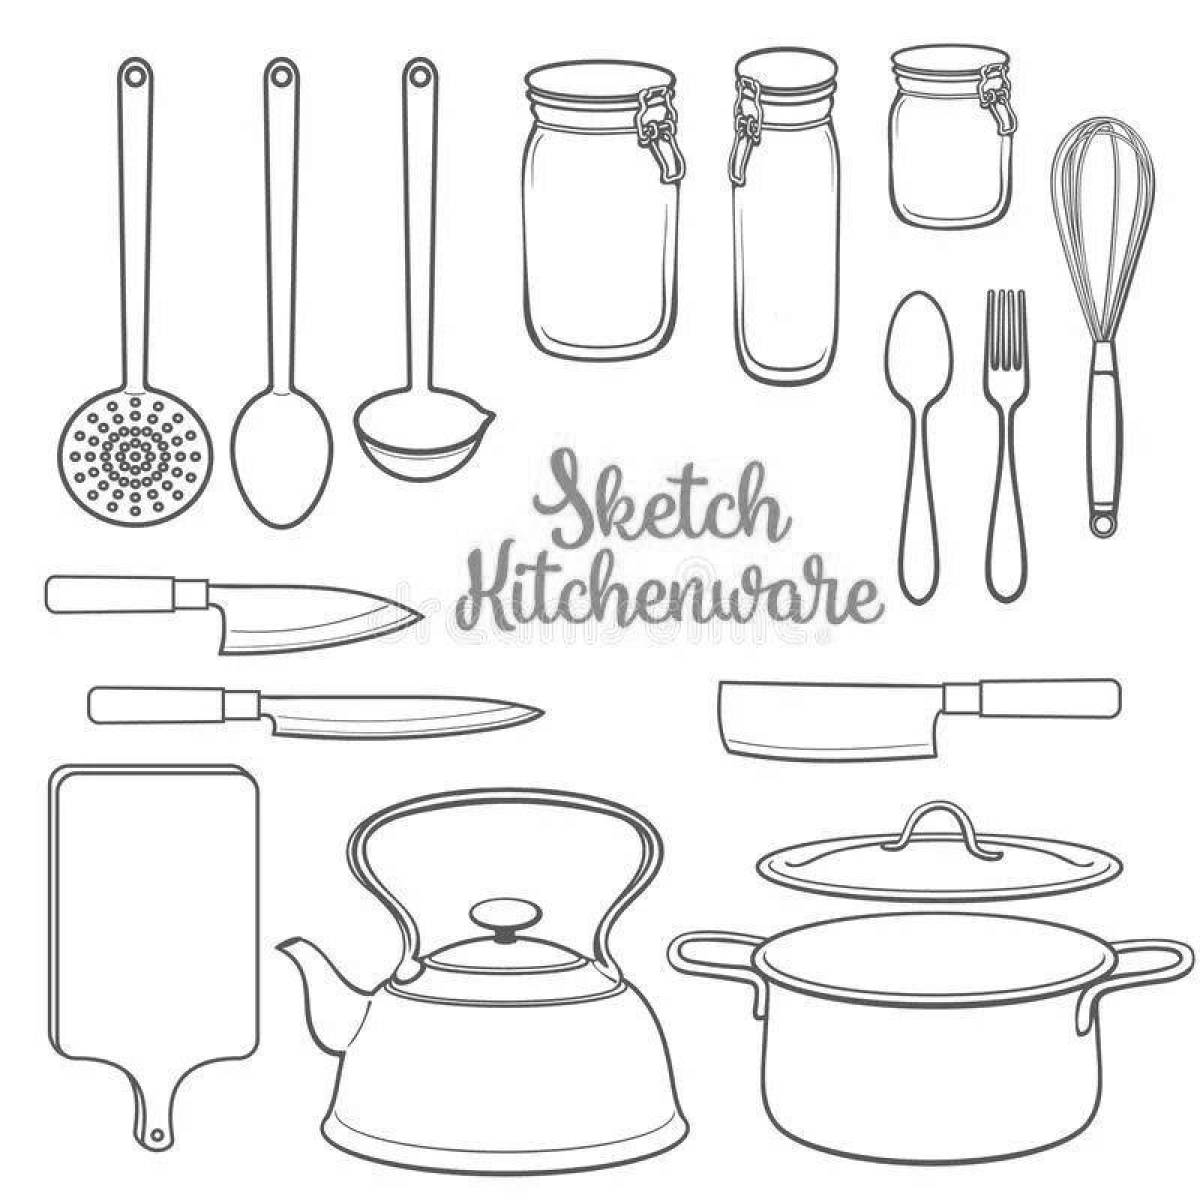 Coloring page for home kitchen appliances